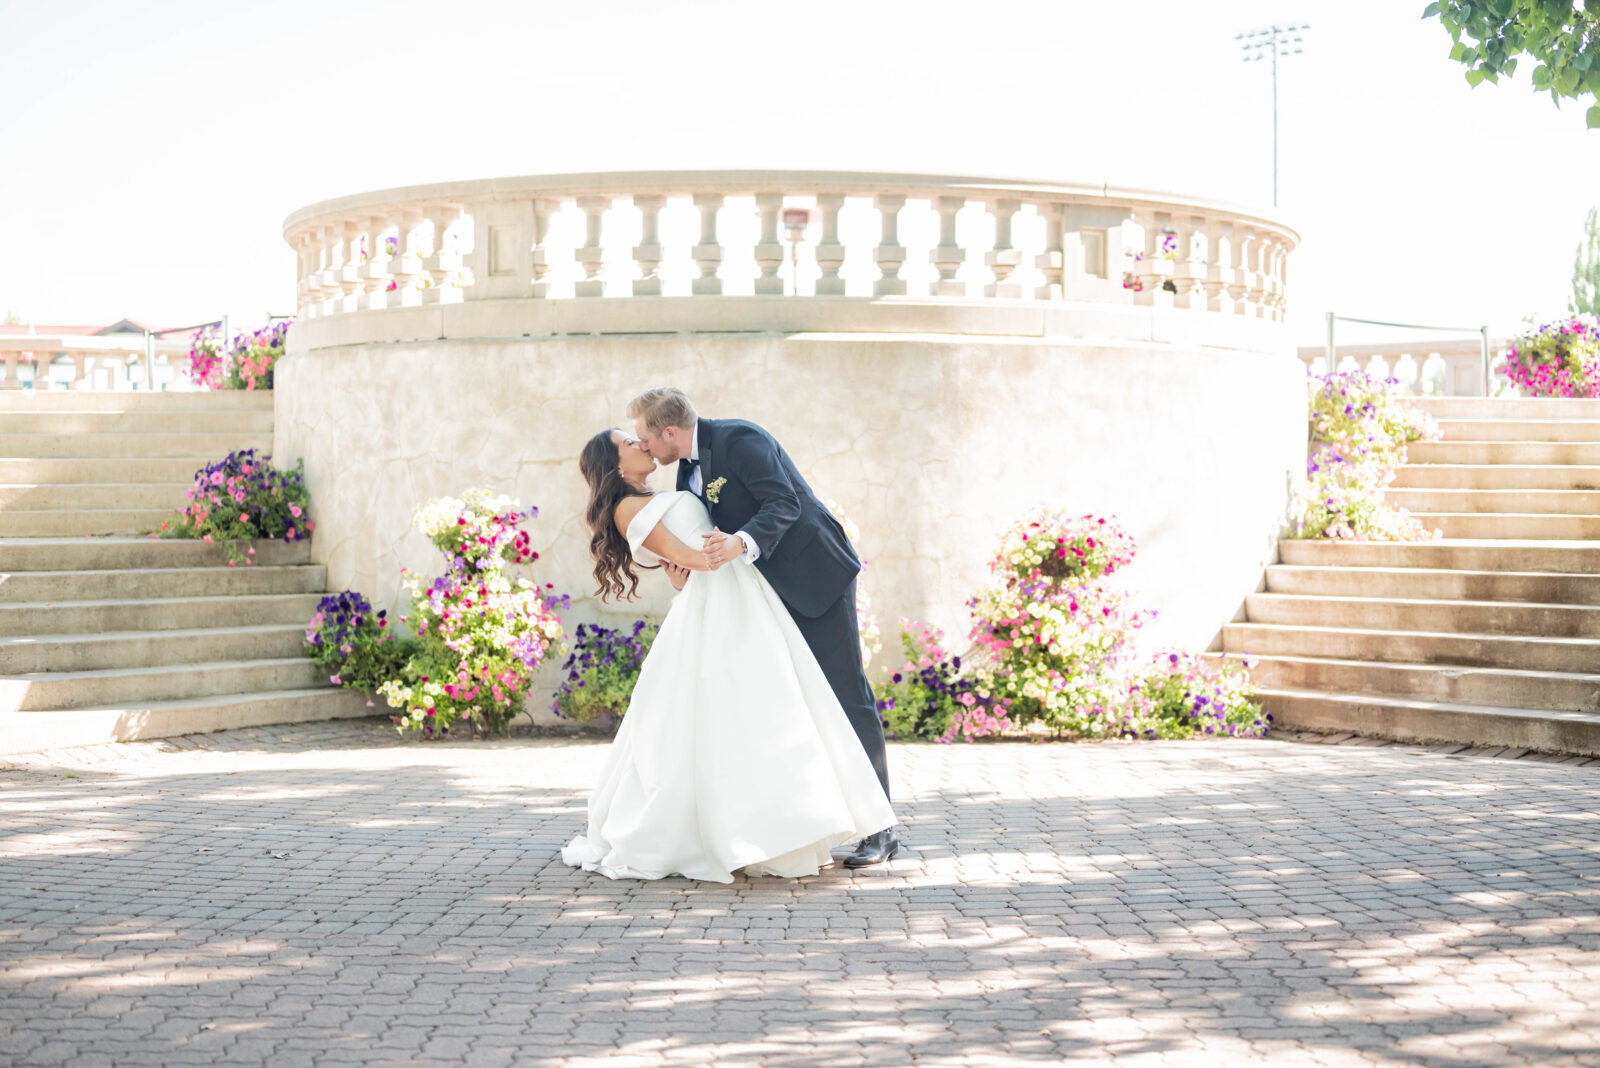 Bride and groom share a dip kiss in front of the elegant staircase and vintage architecture at Spruce Meadows, surrounded by colourful flowers and greenery.